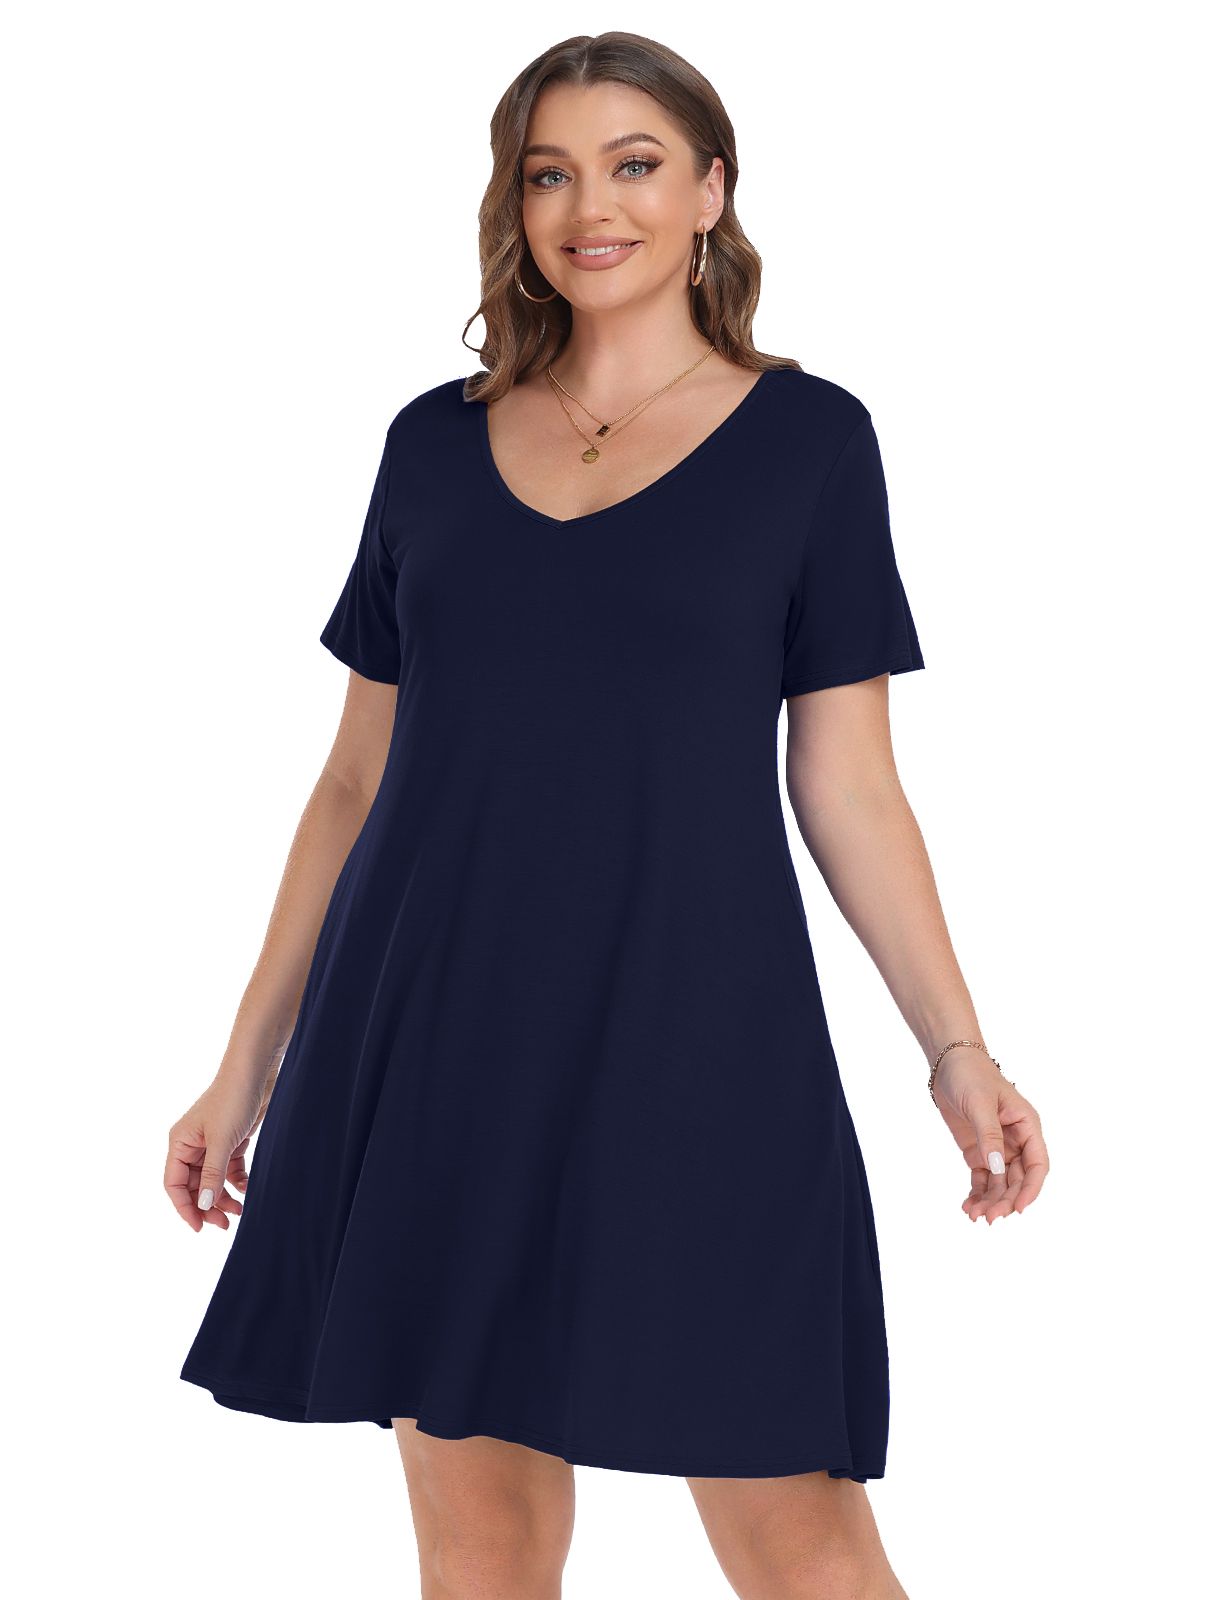 Plus Size Dresses for Women, VEPKUL V Neck T Shirt Dress 2024 Short Sleeve Casual Loose Swing Summer Dress with Pockets - image 5 of 9